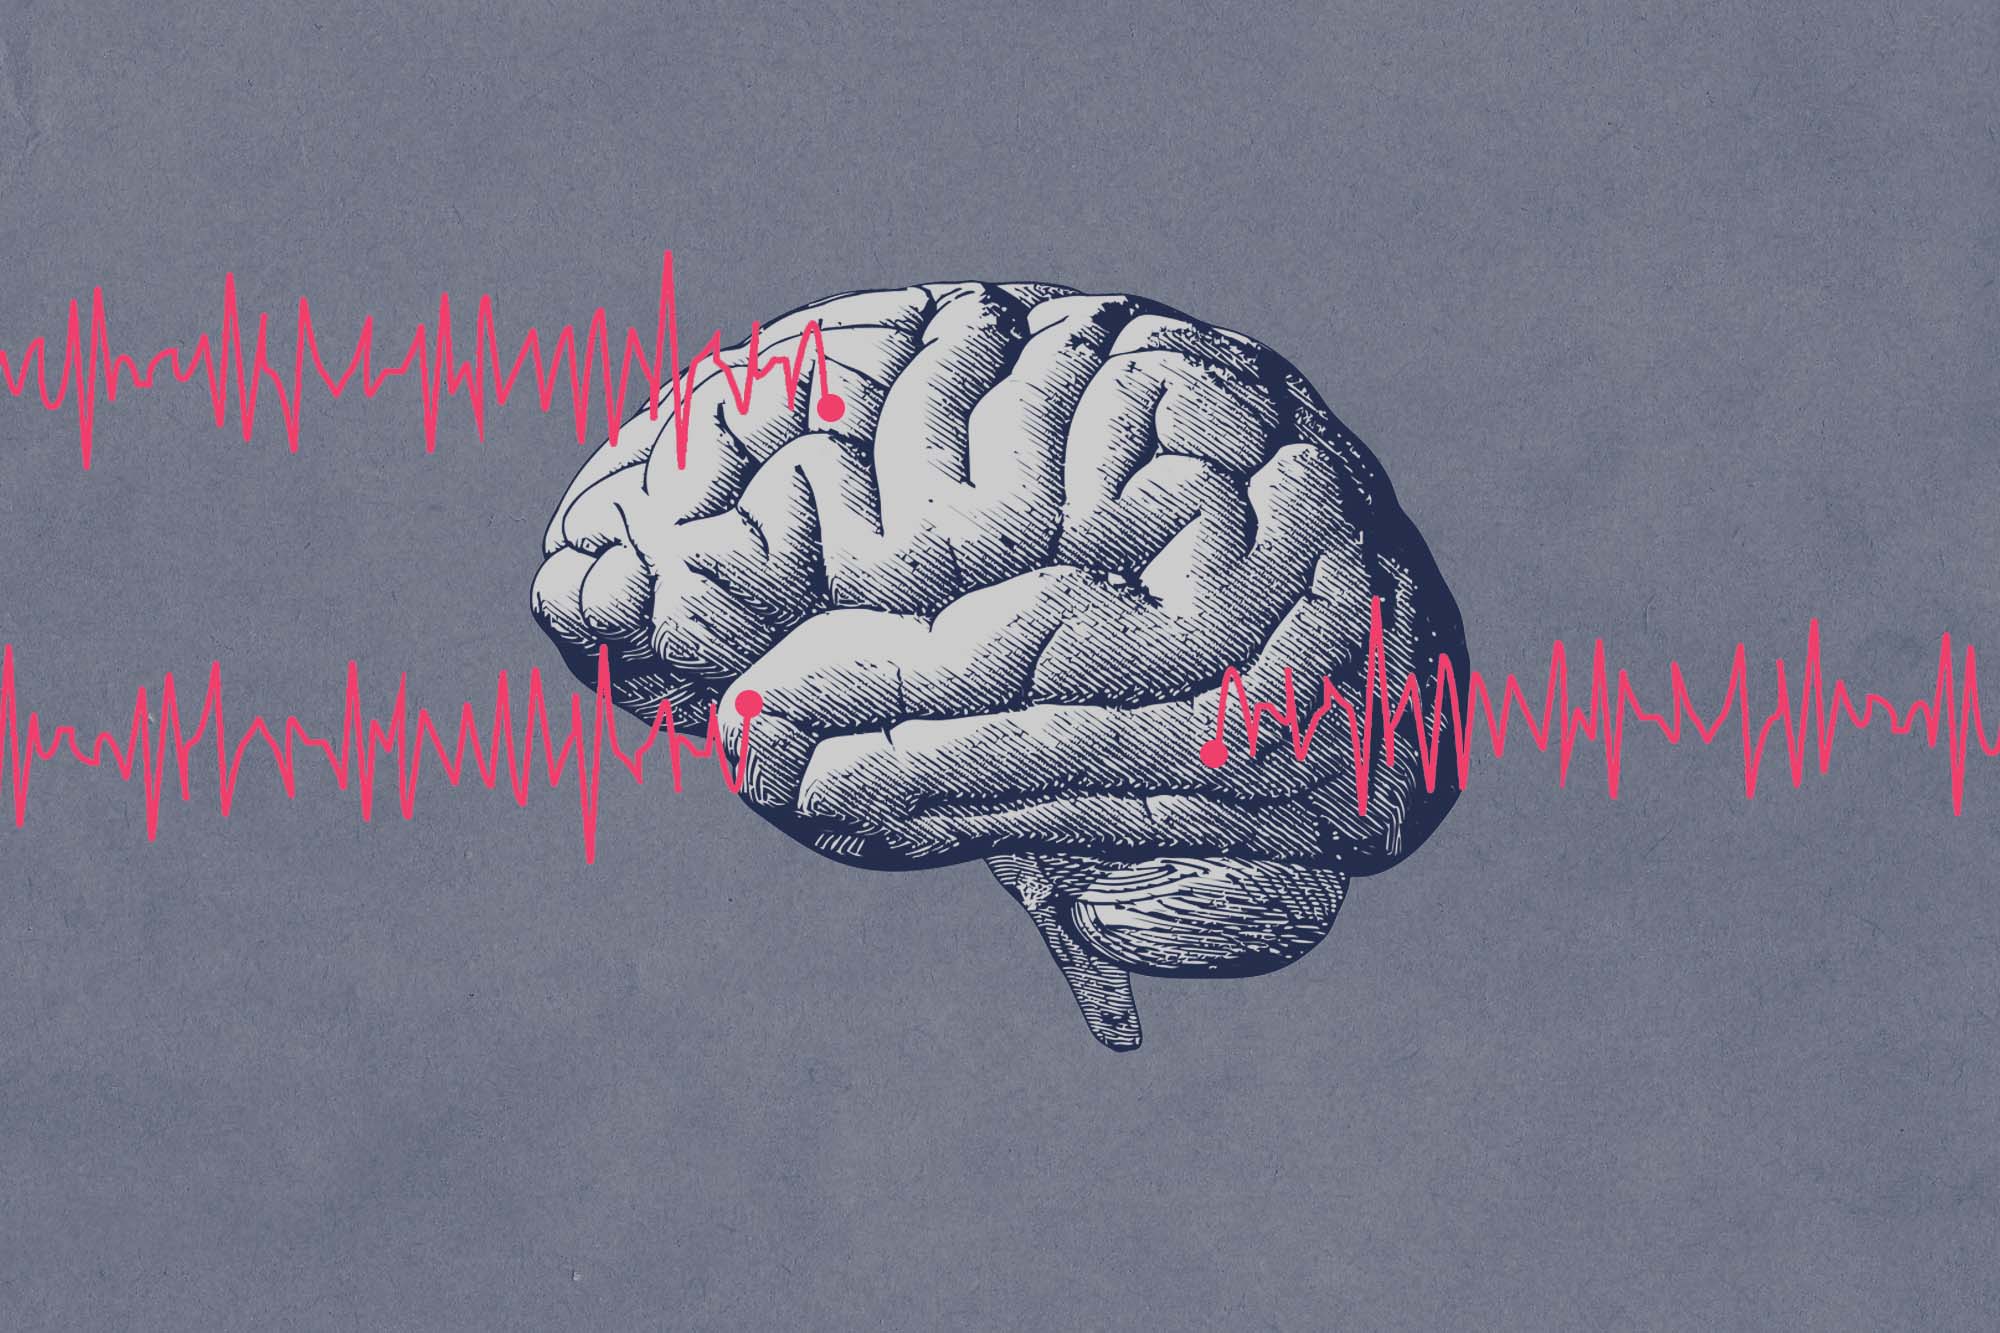 Illustration of a brain with brain waves going to and from it across the image